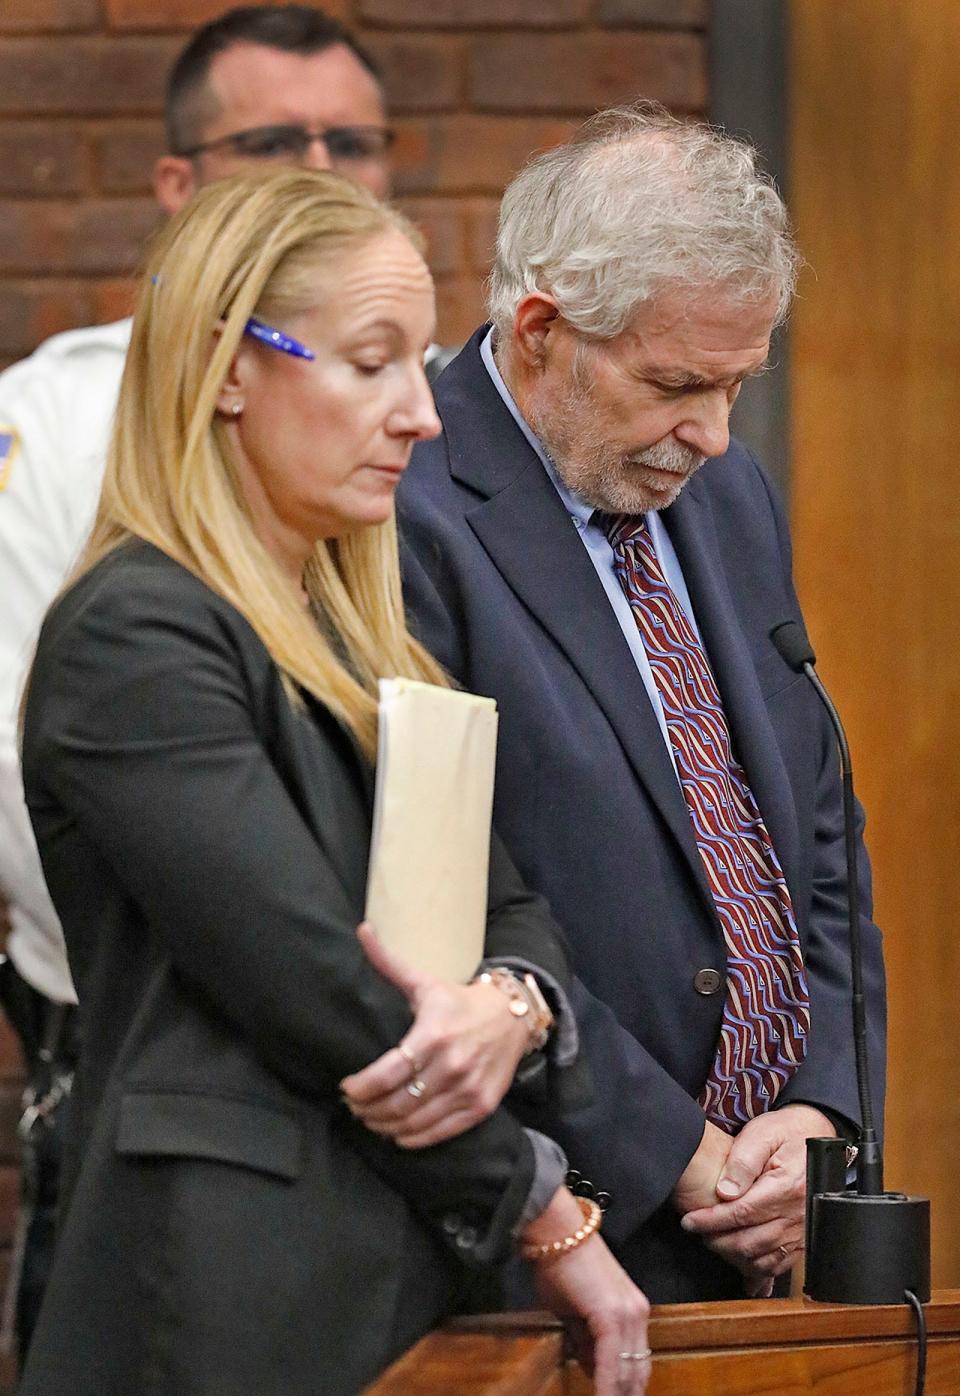 Defense attorney Kelli Porges, left, and her client, Norwell pediatrician Dr. Richard Kauff, listen to the charges during his arraignment in Hingham District Court on Monday, Nov. 20, 2023, on charges of sexual assault as a result of complaints from former patients.